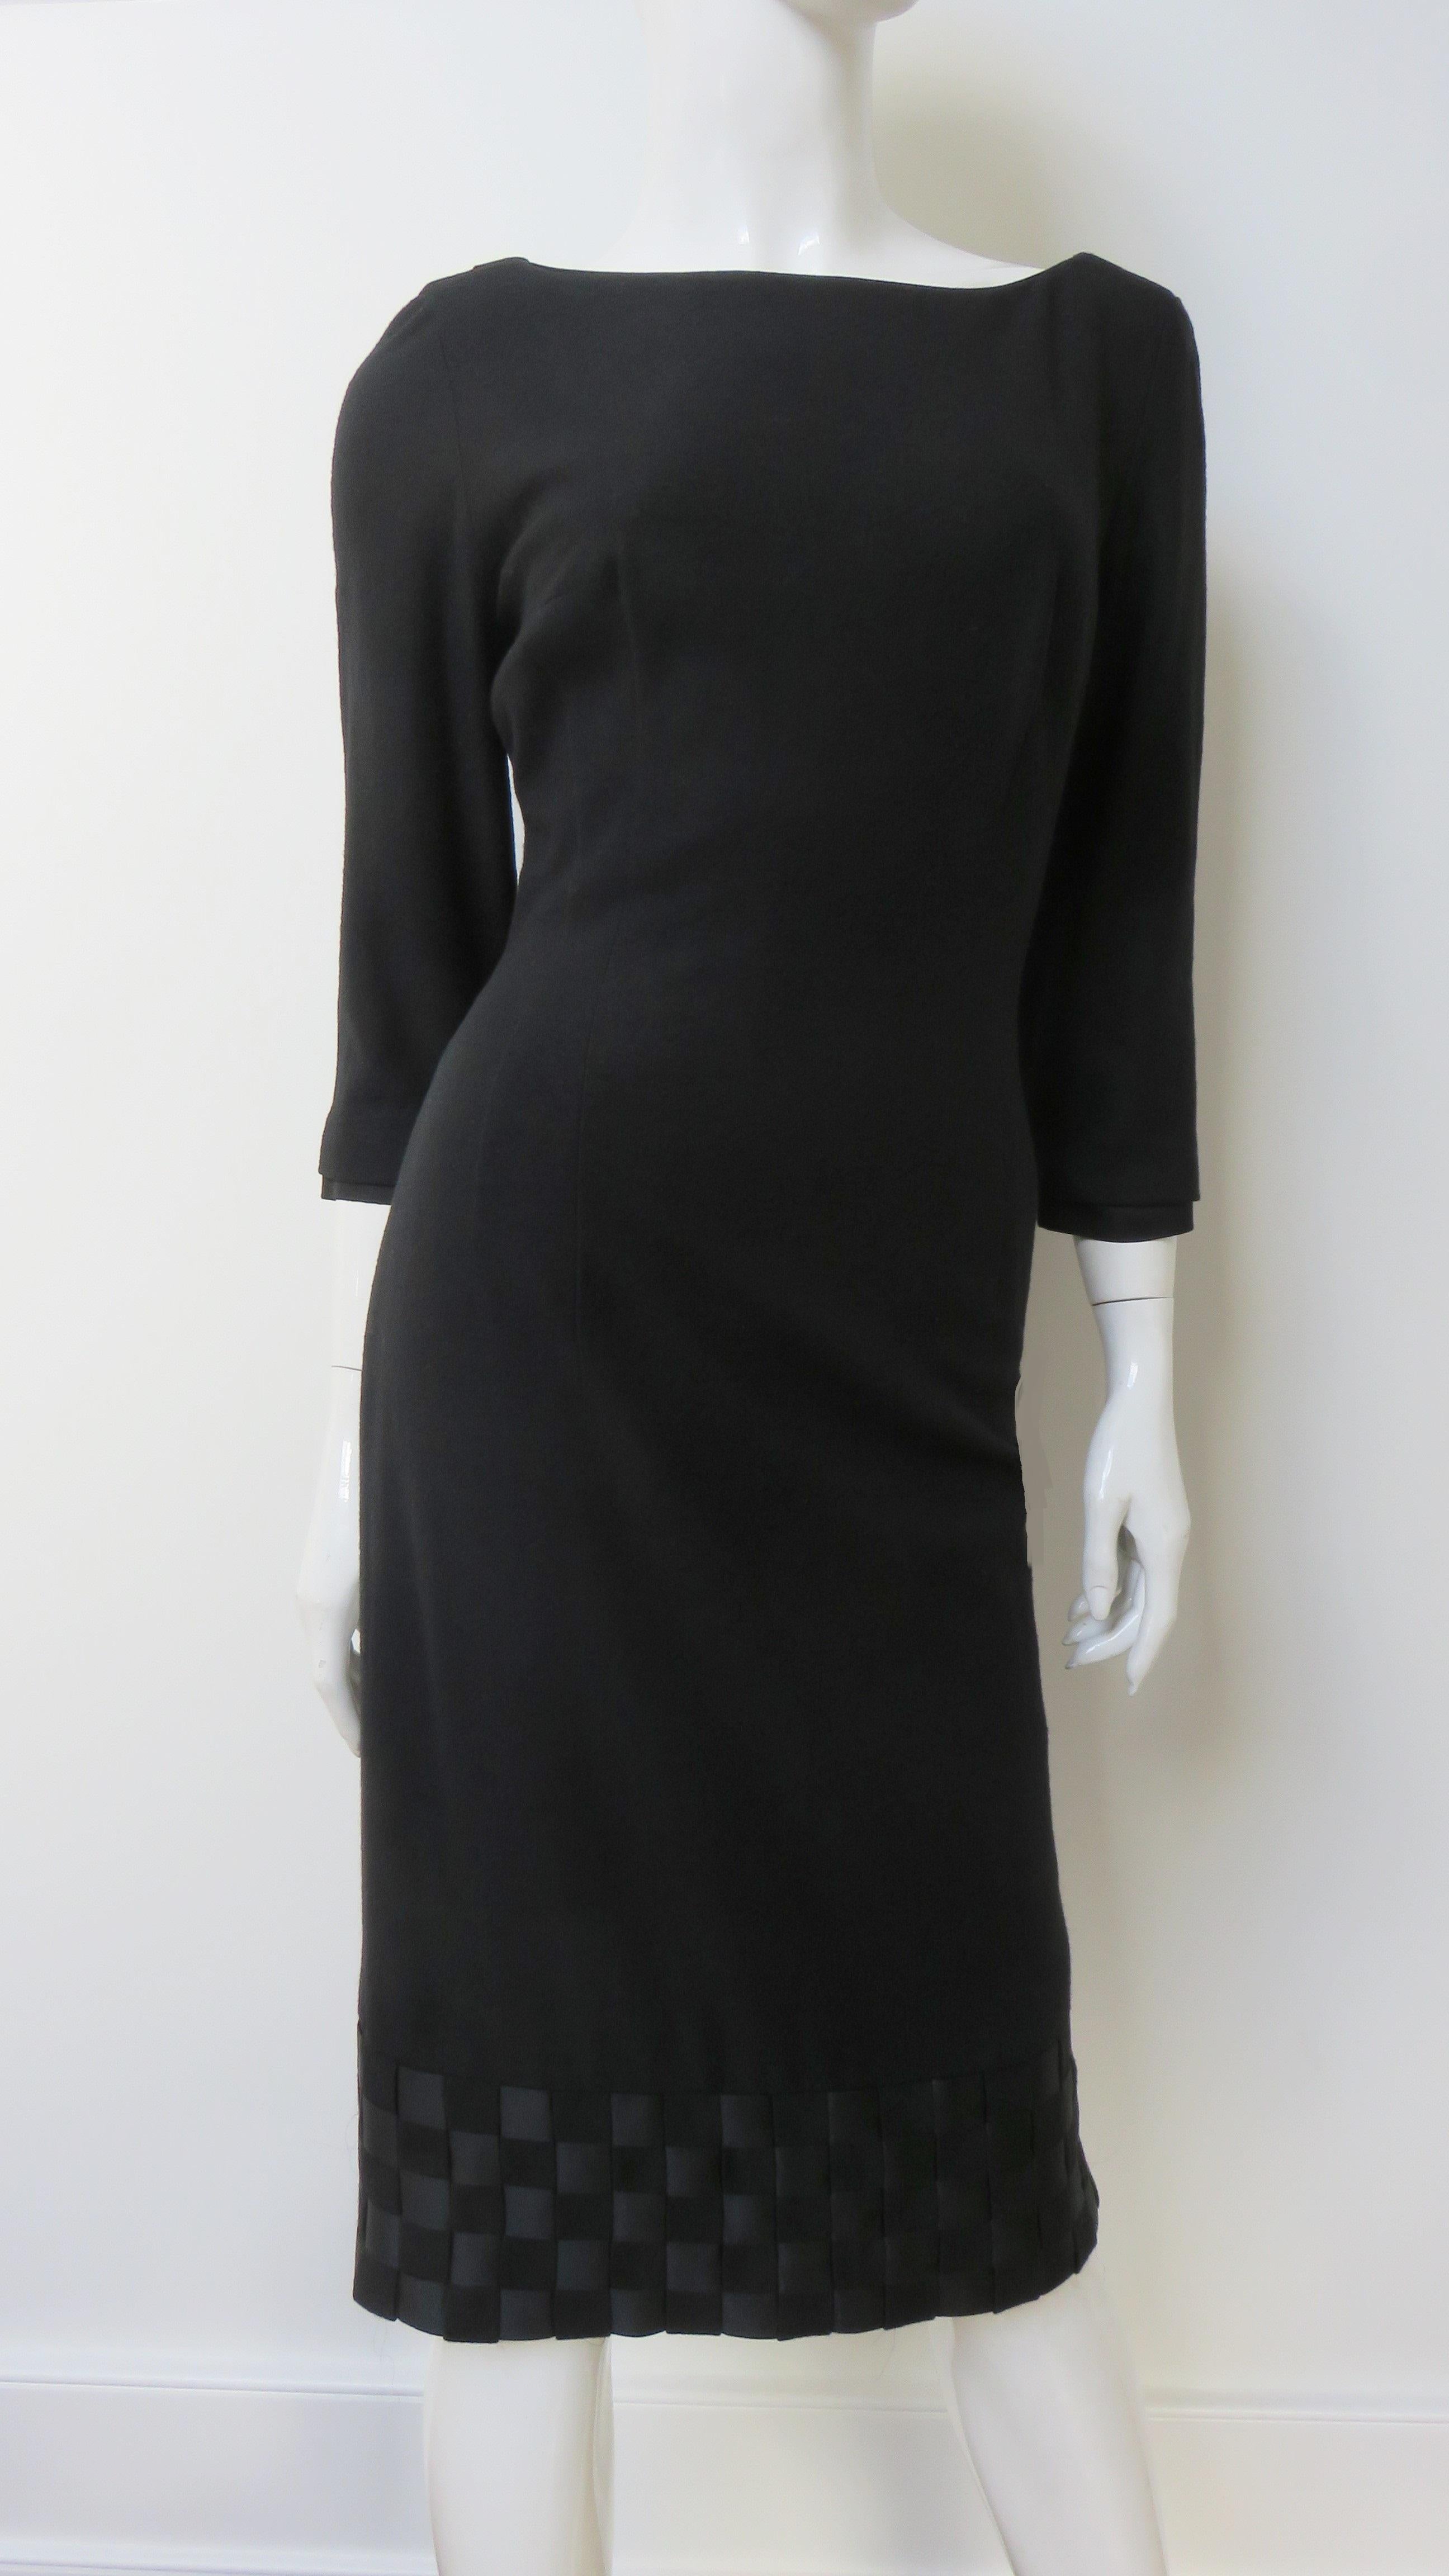 Mr Blackwell Woven Hem and Collar 1950s Dress For Sale 4